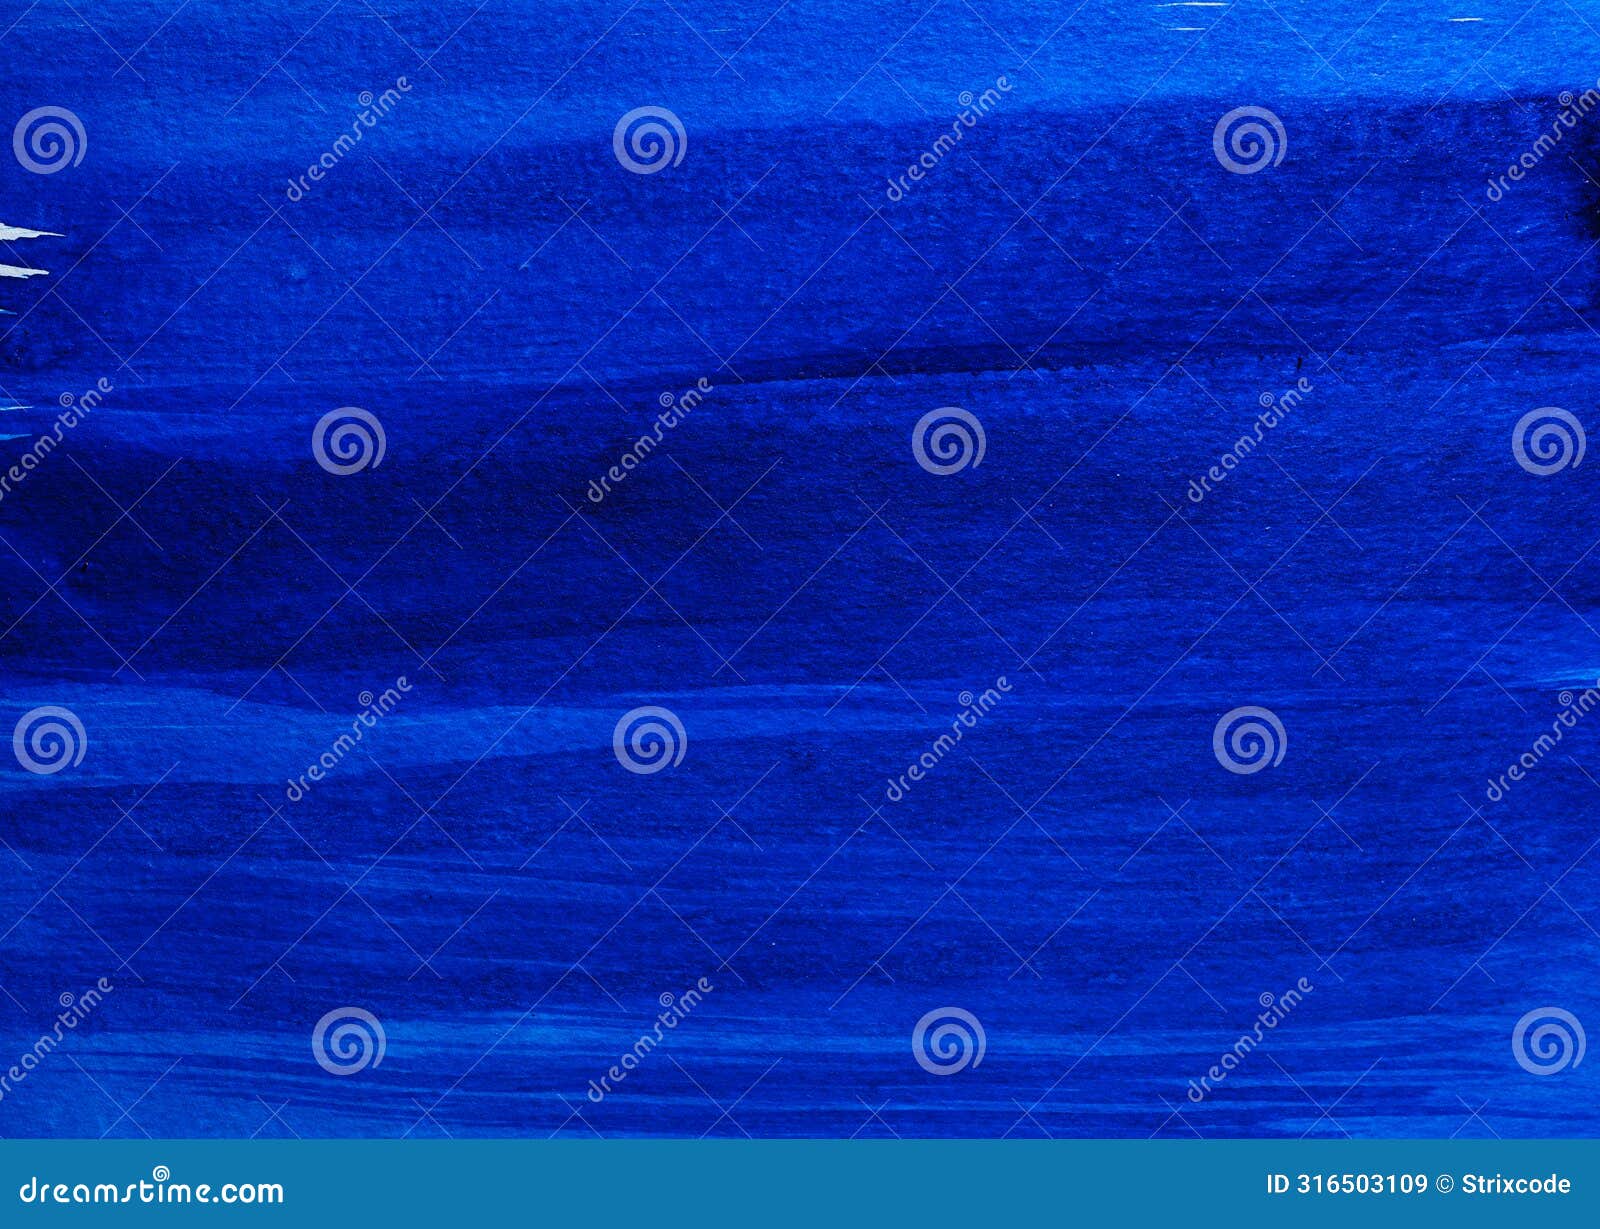 abstract intense blue watercolor background